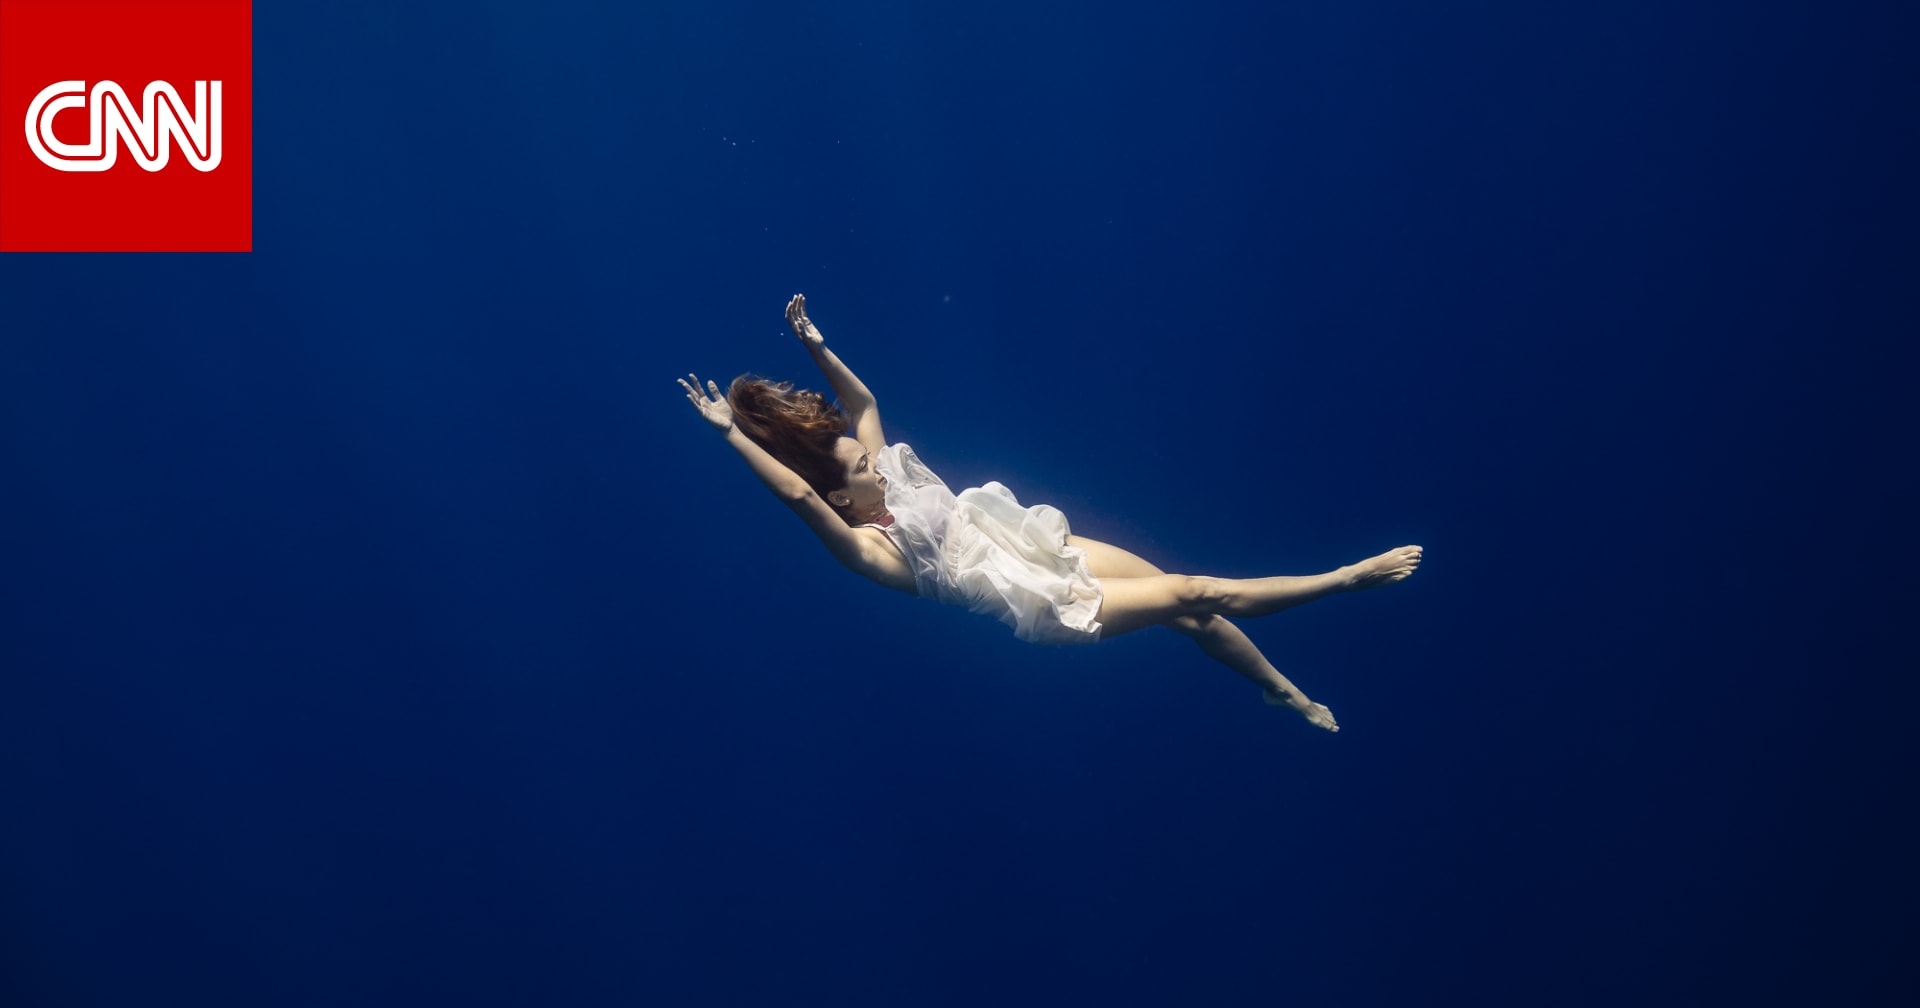 Dancing underwater in Egypt … a “witchcraft” experience that promotes women’s freedom